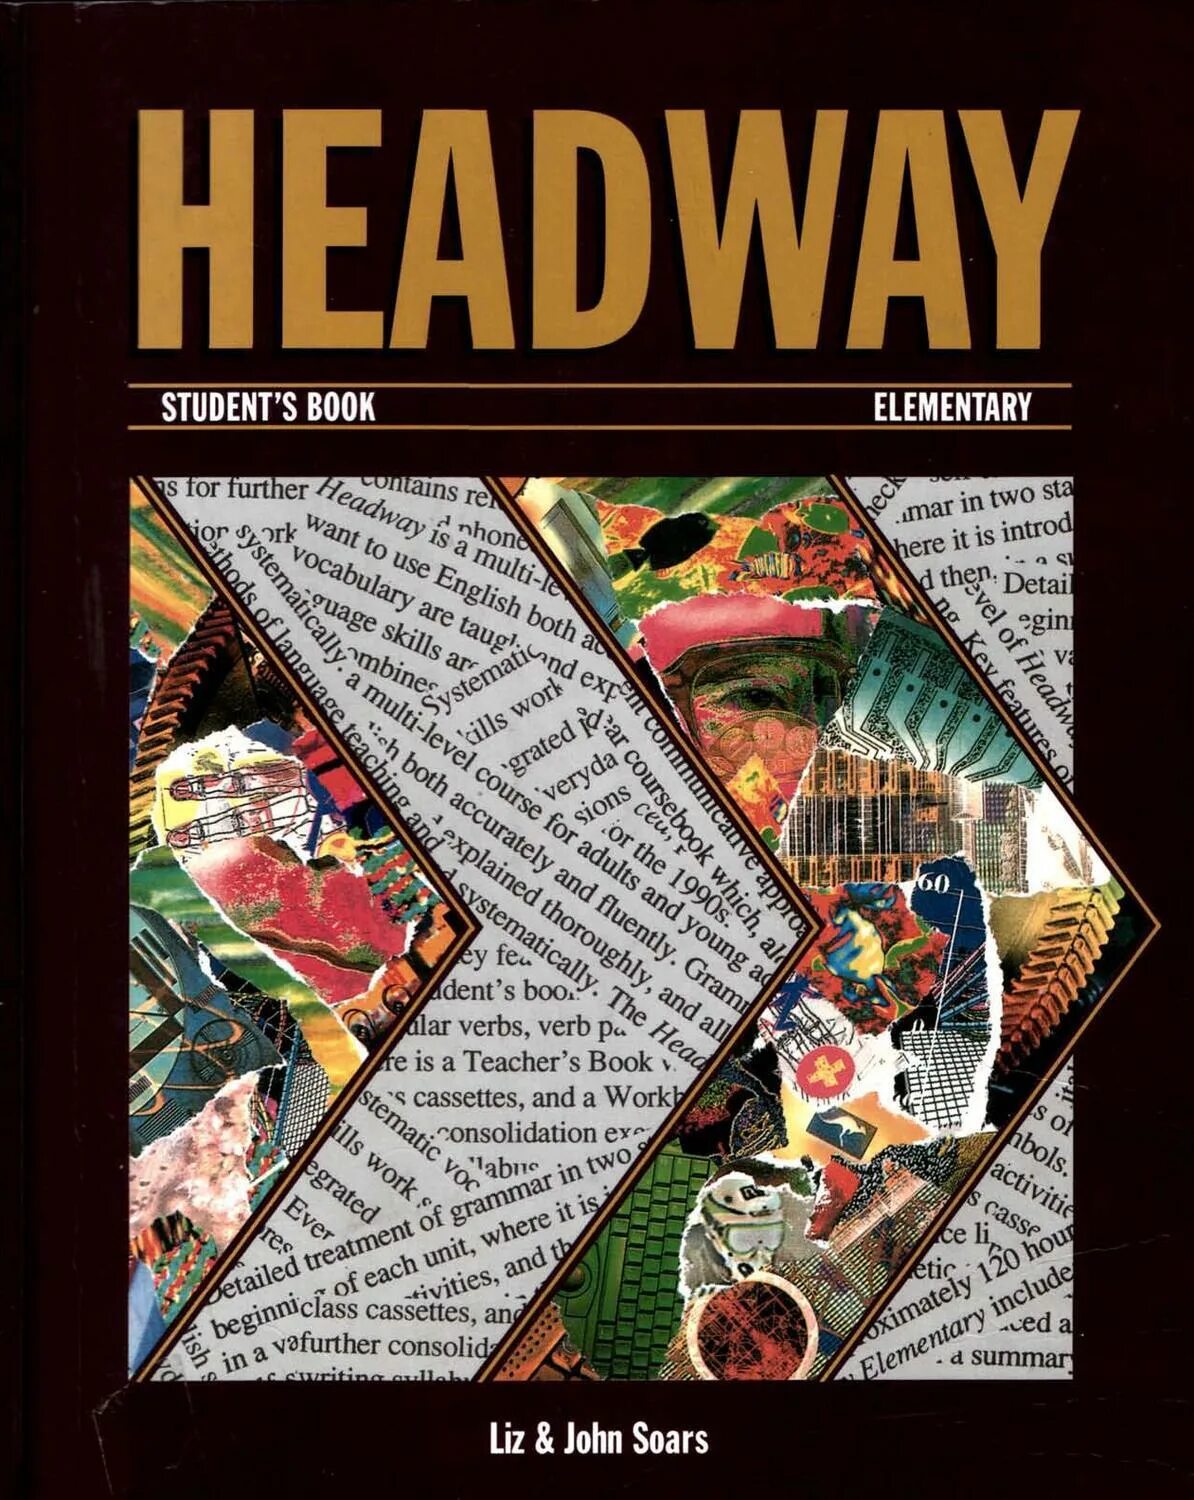 Headway Elementary Edition students book. Headway Elementary student book Oxford. Headway Elementary 1st Edition. Headway Elementary книга. Headway elementary ответы